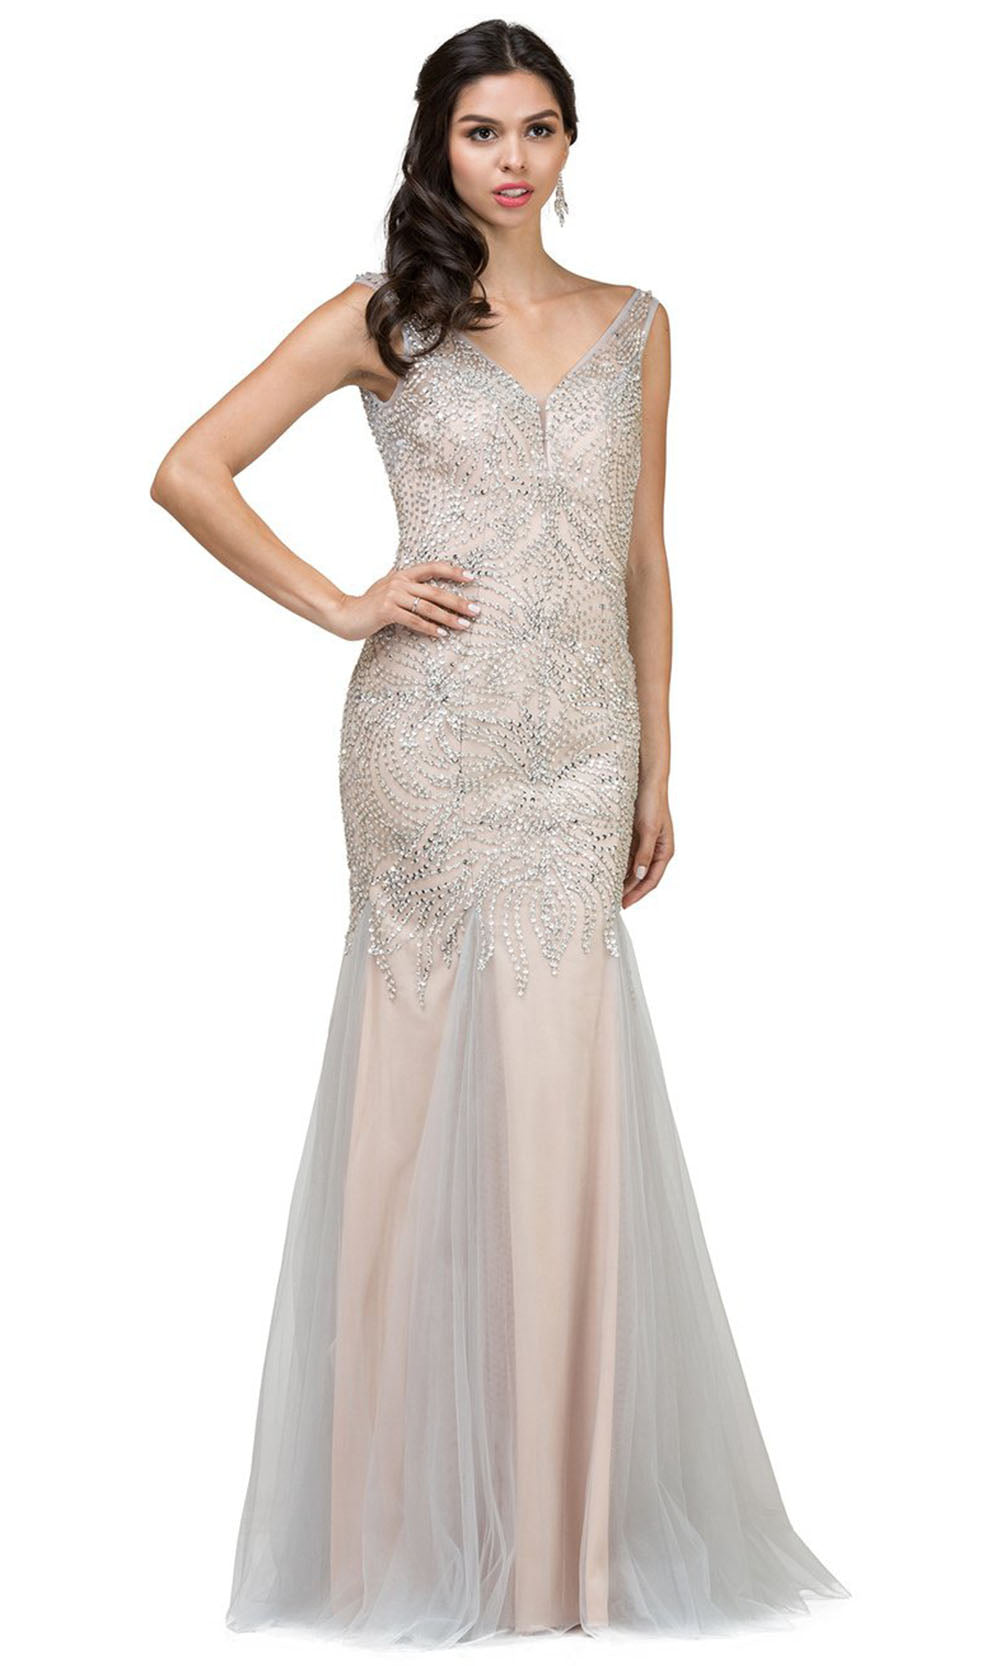 Dancing Queen - 9978 Sleeveless V Neck Crystal Trumpet Gown In Silver